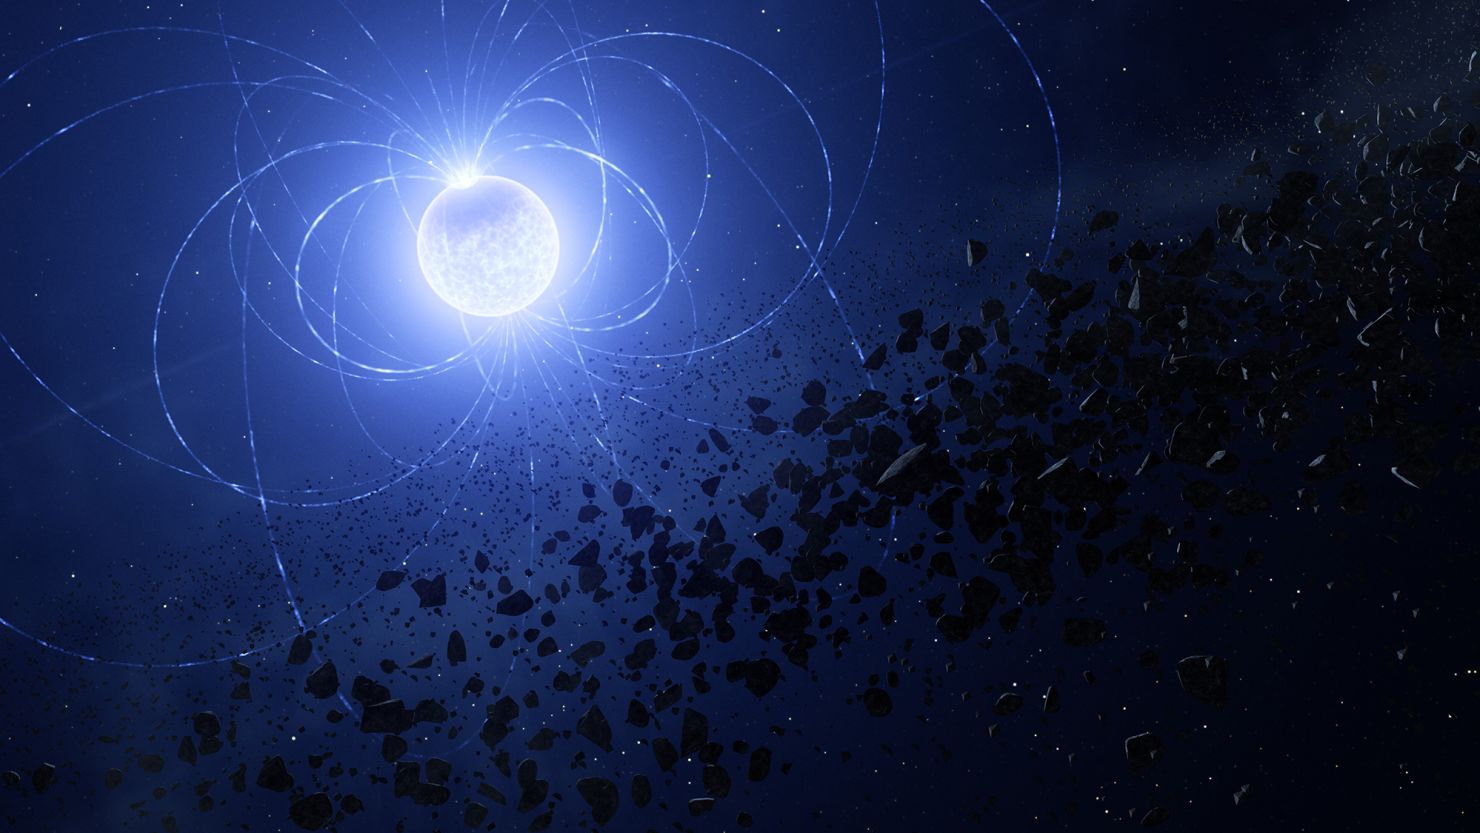 An artist's impression depicts a dead white dwarf star and its magnetic field, which is usually invisible but shown in loops around the star. The dark area near one of the star's poles is a metal scar that remained after the star consumed a planetary fragment.